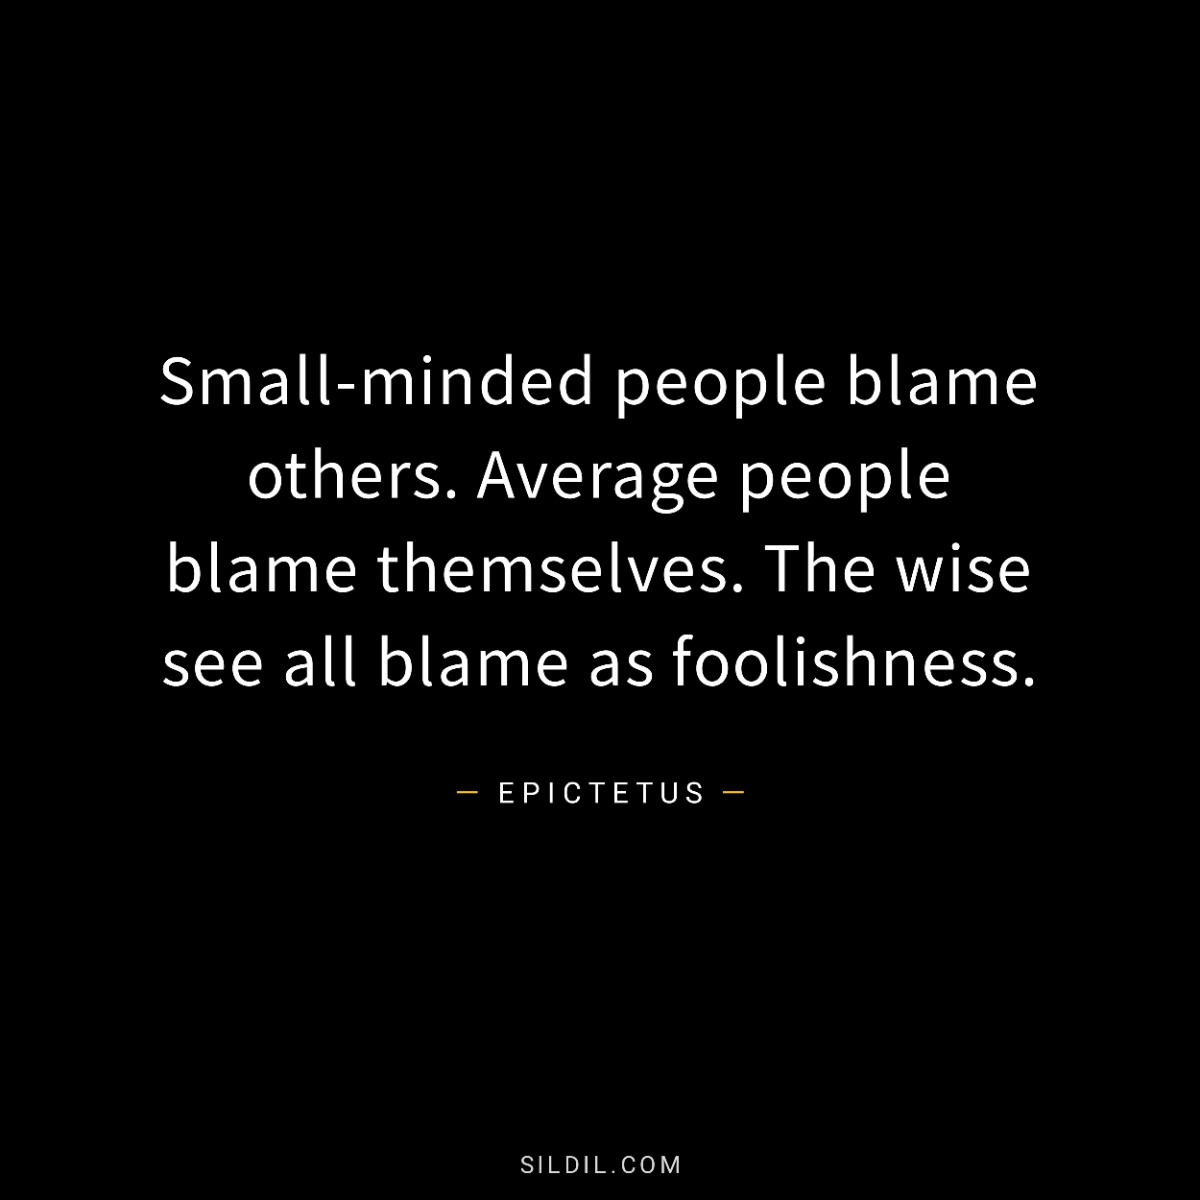 Small-minded people blame others. Average people blame themselves. The wise see all blame as foolishness.